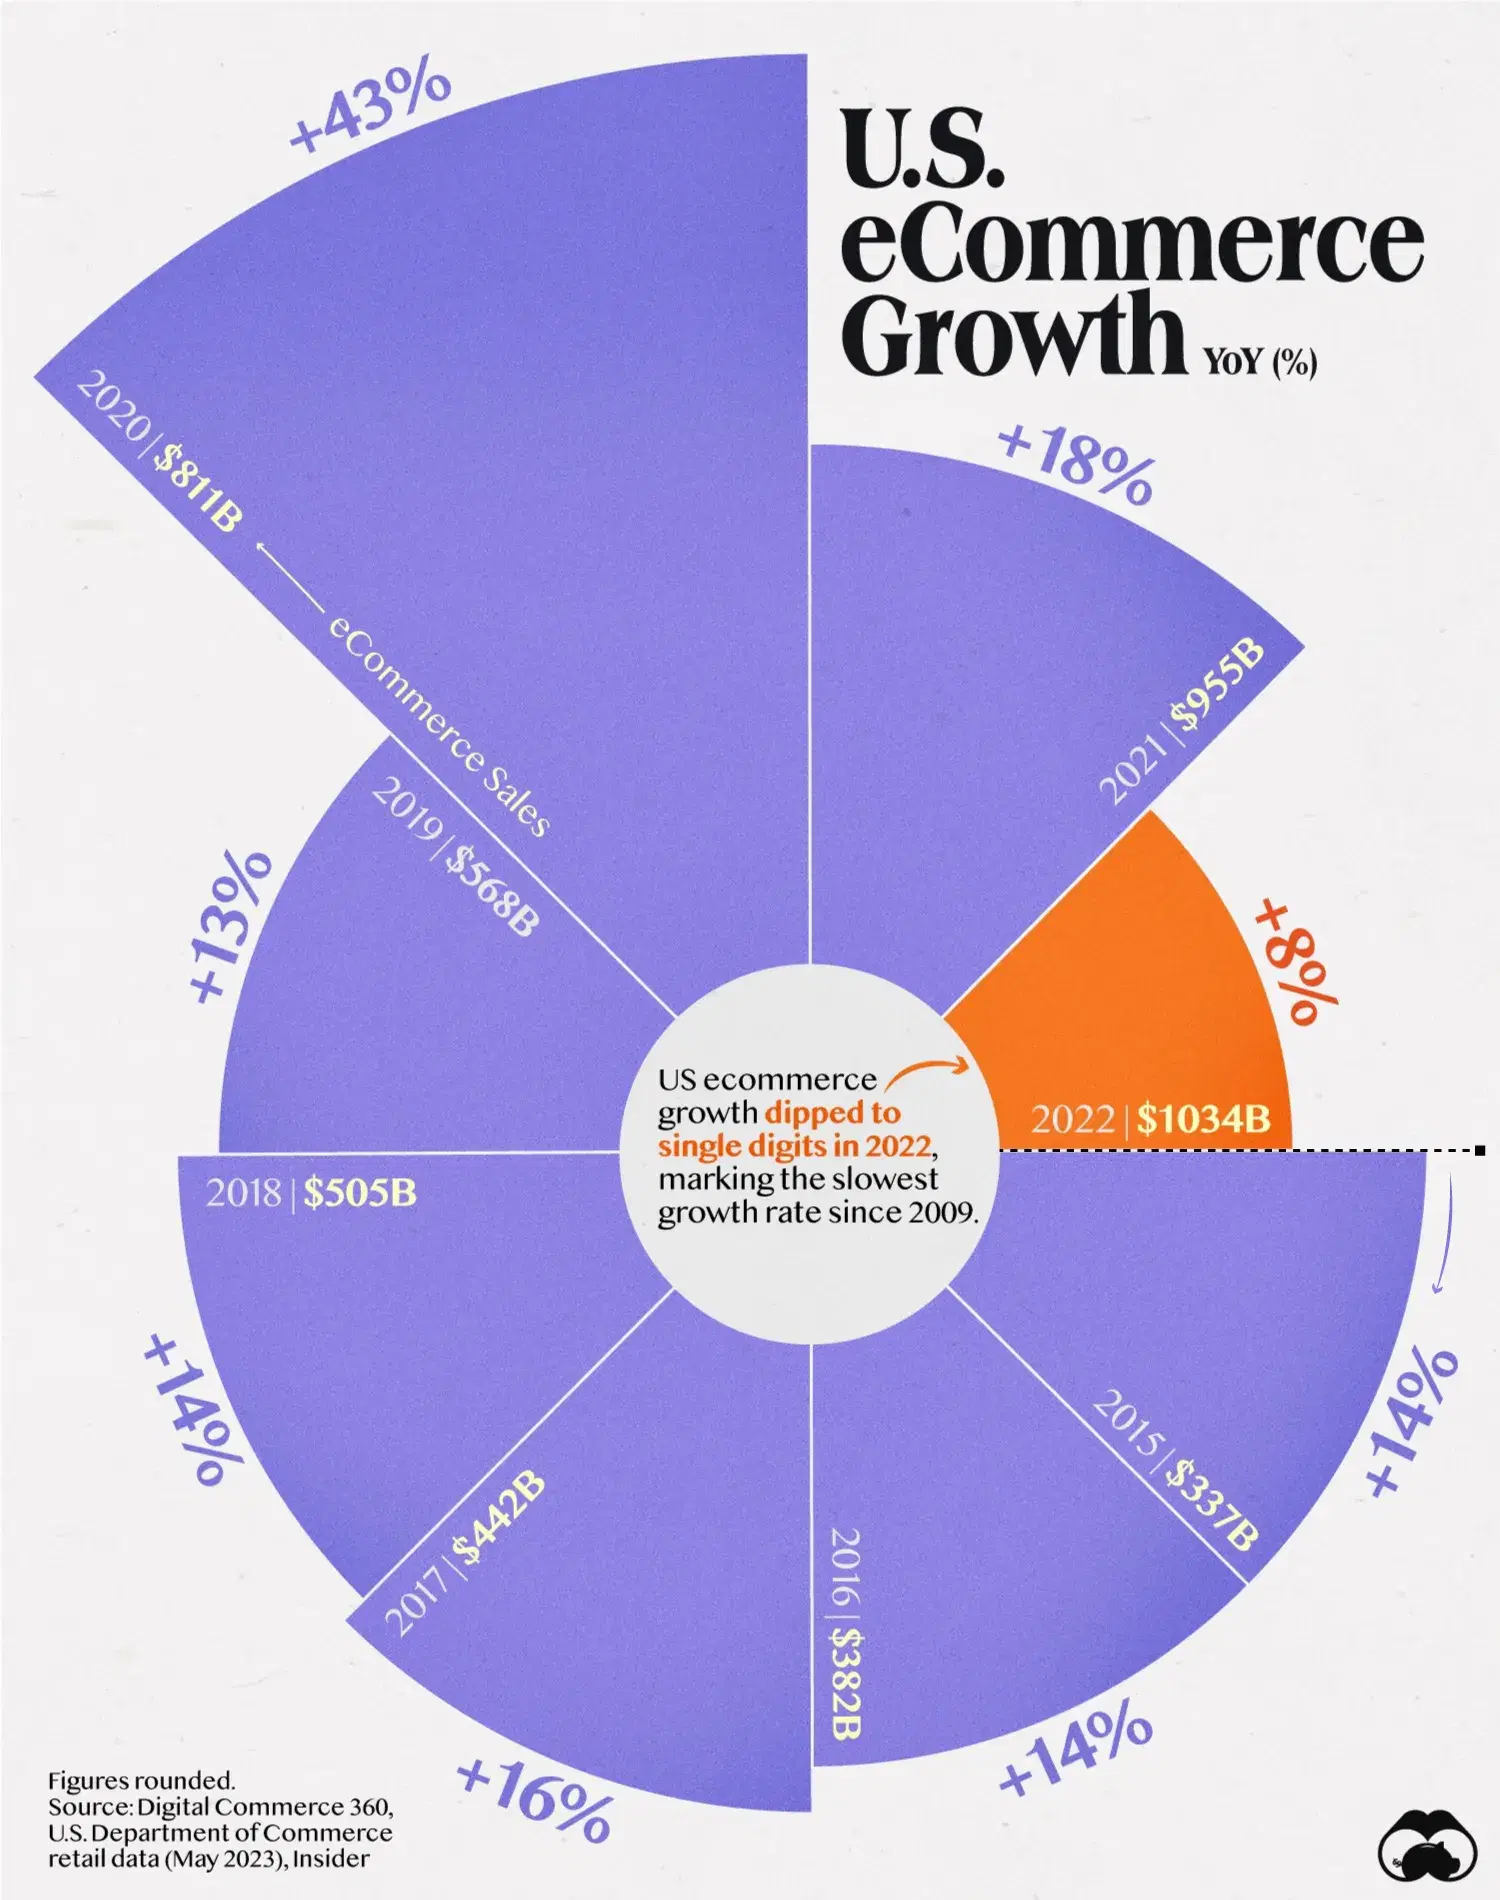 eCommerce Growth in the U.S. is Slowing Down